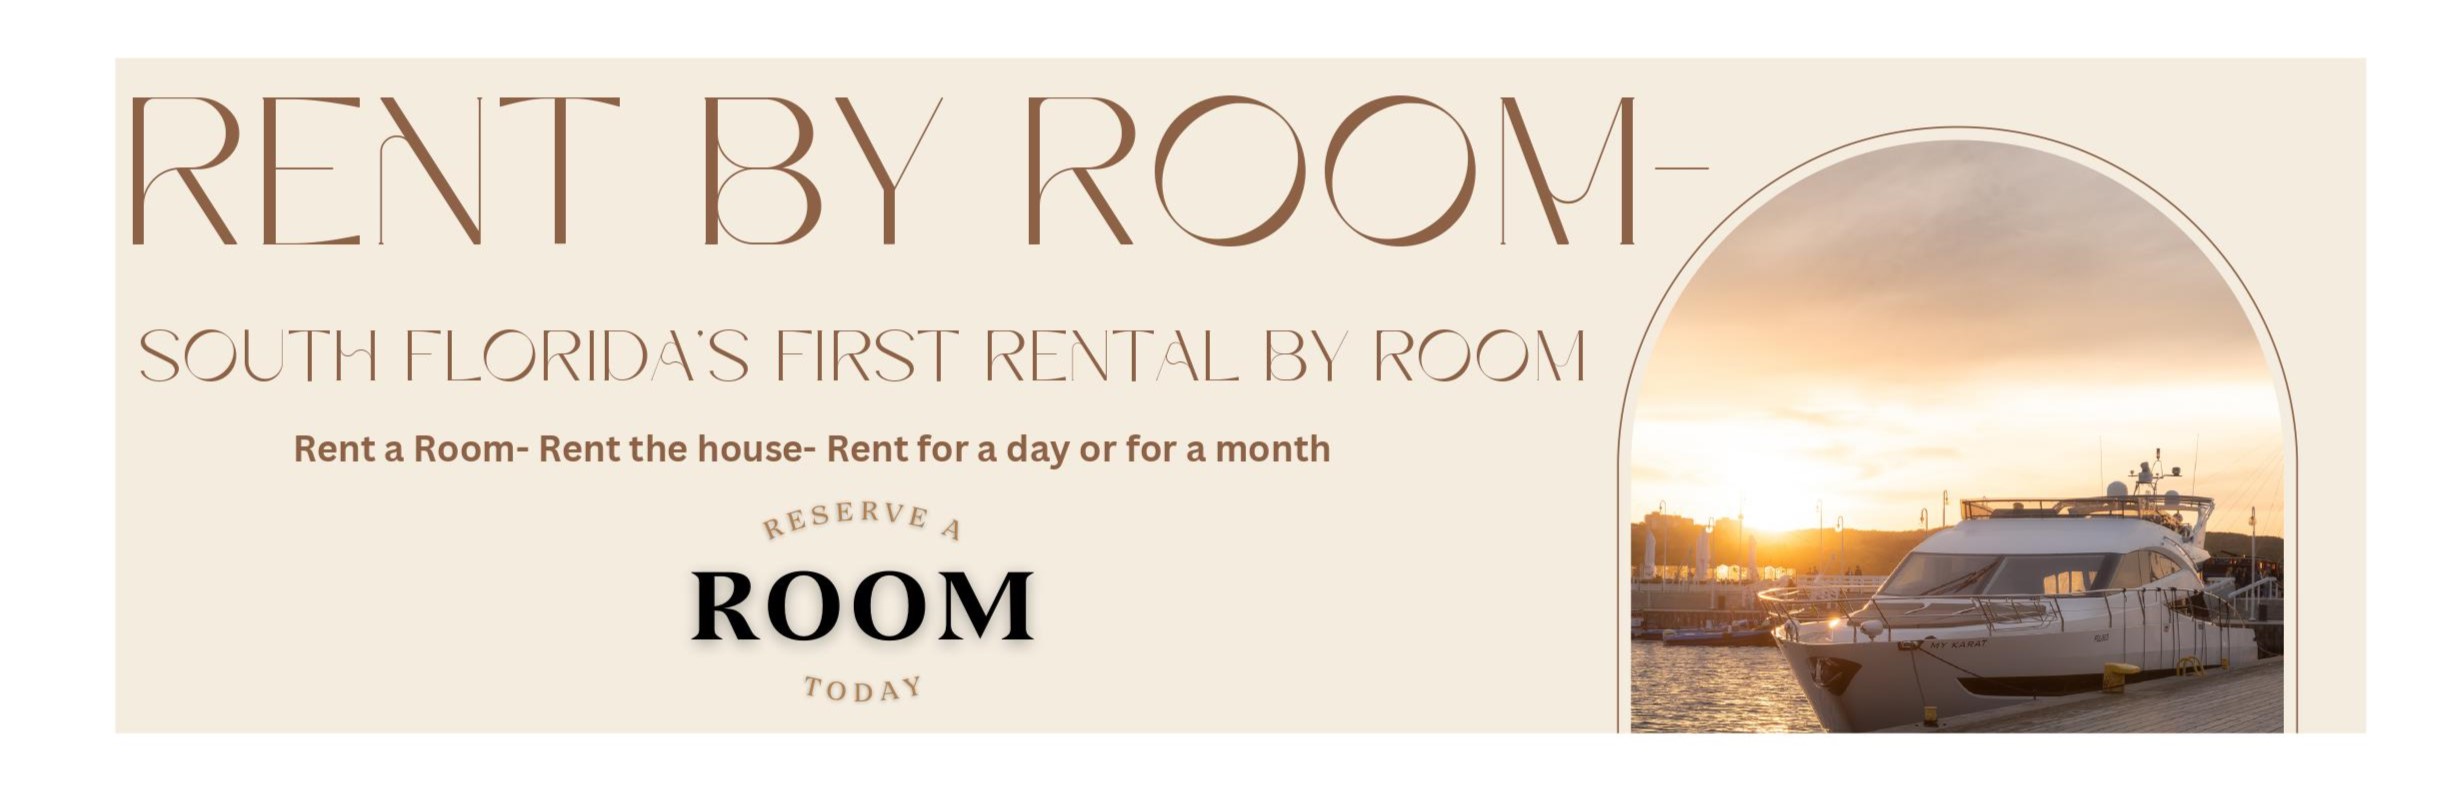 Rent by Room- South Florida Platform to rent Room's in a House